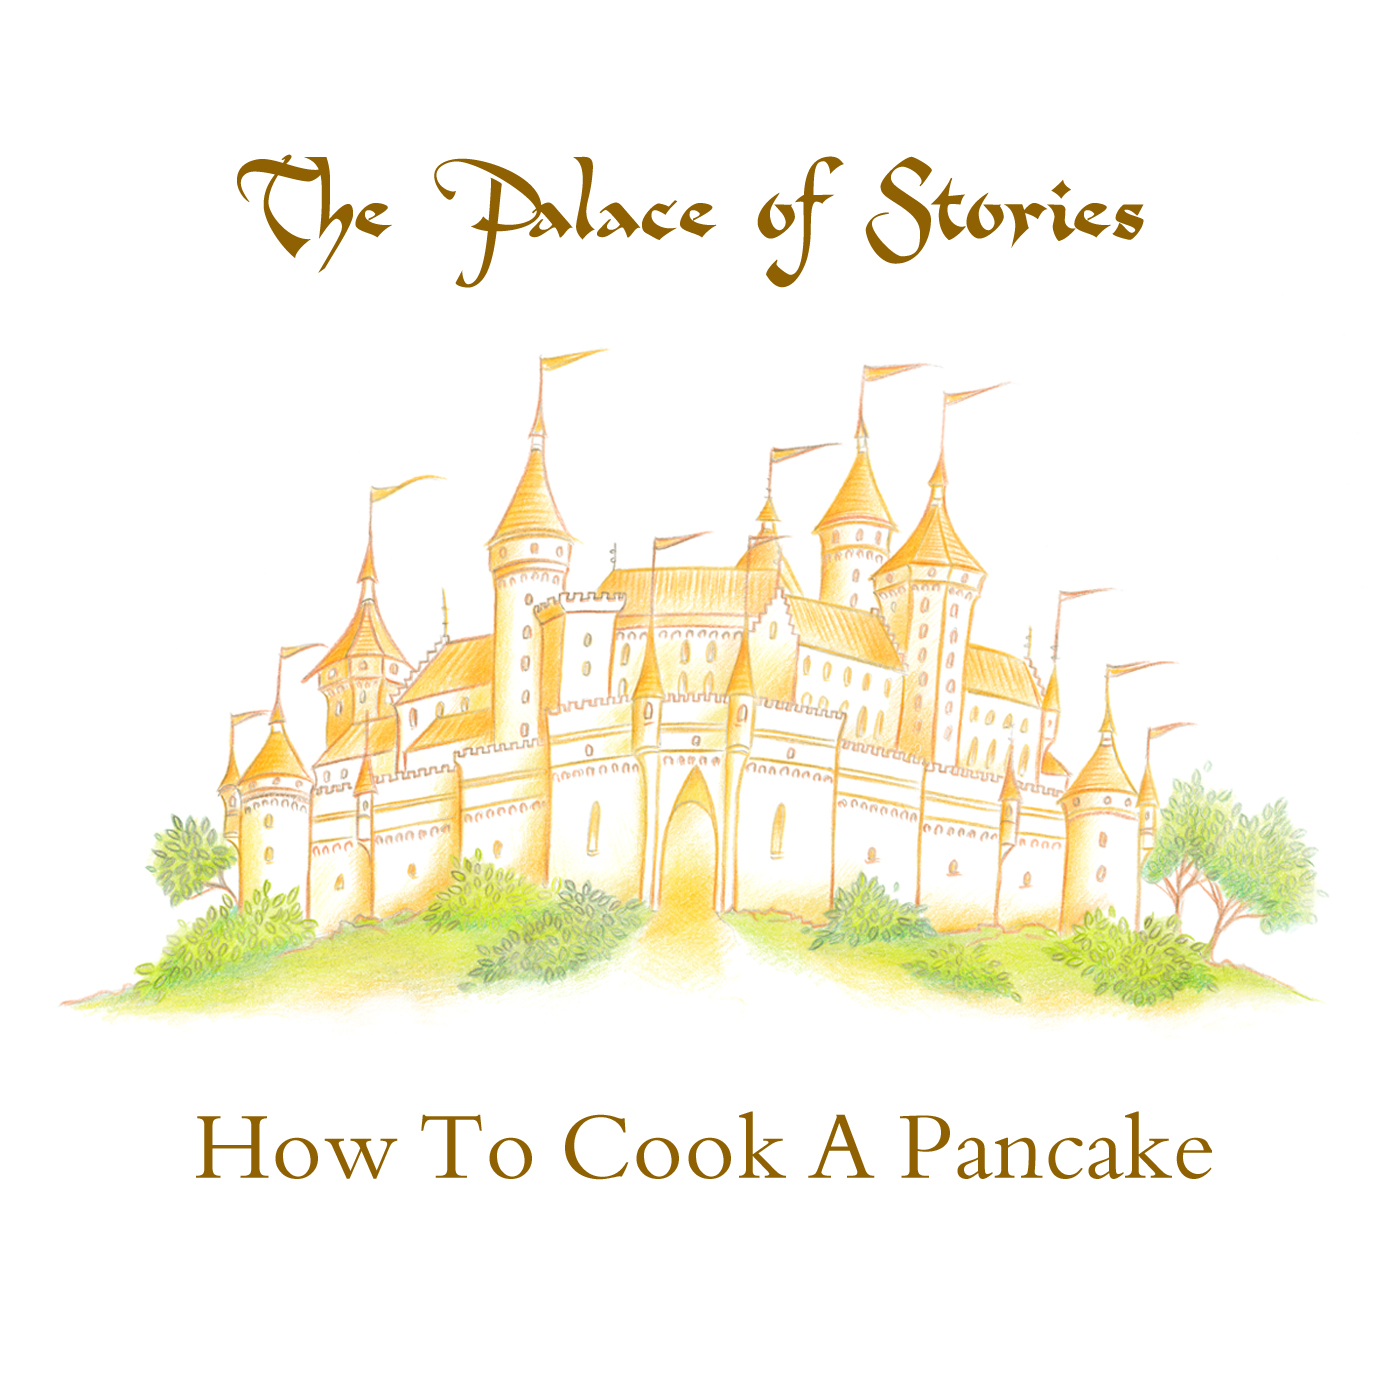 How To Cook A Pancake